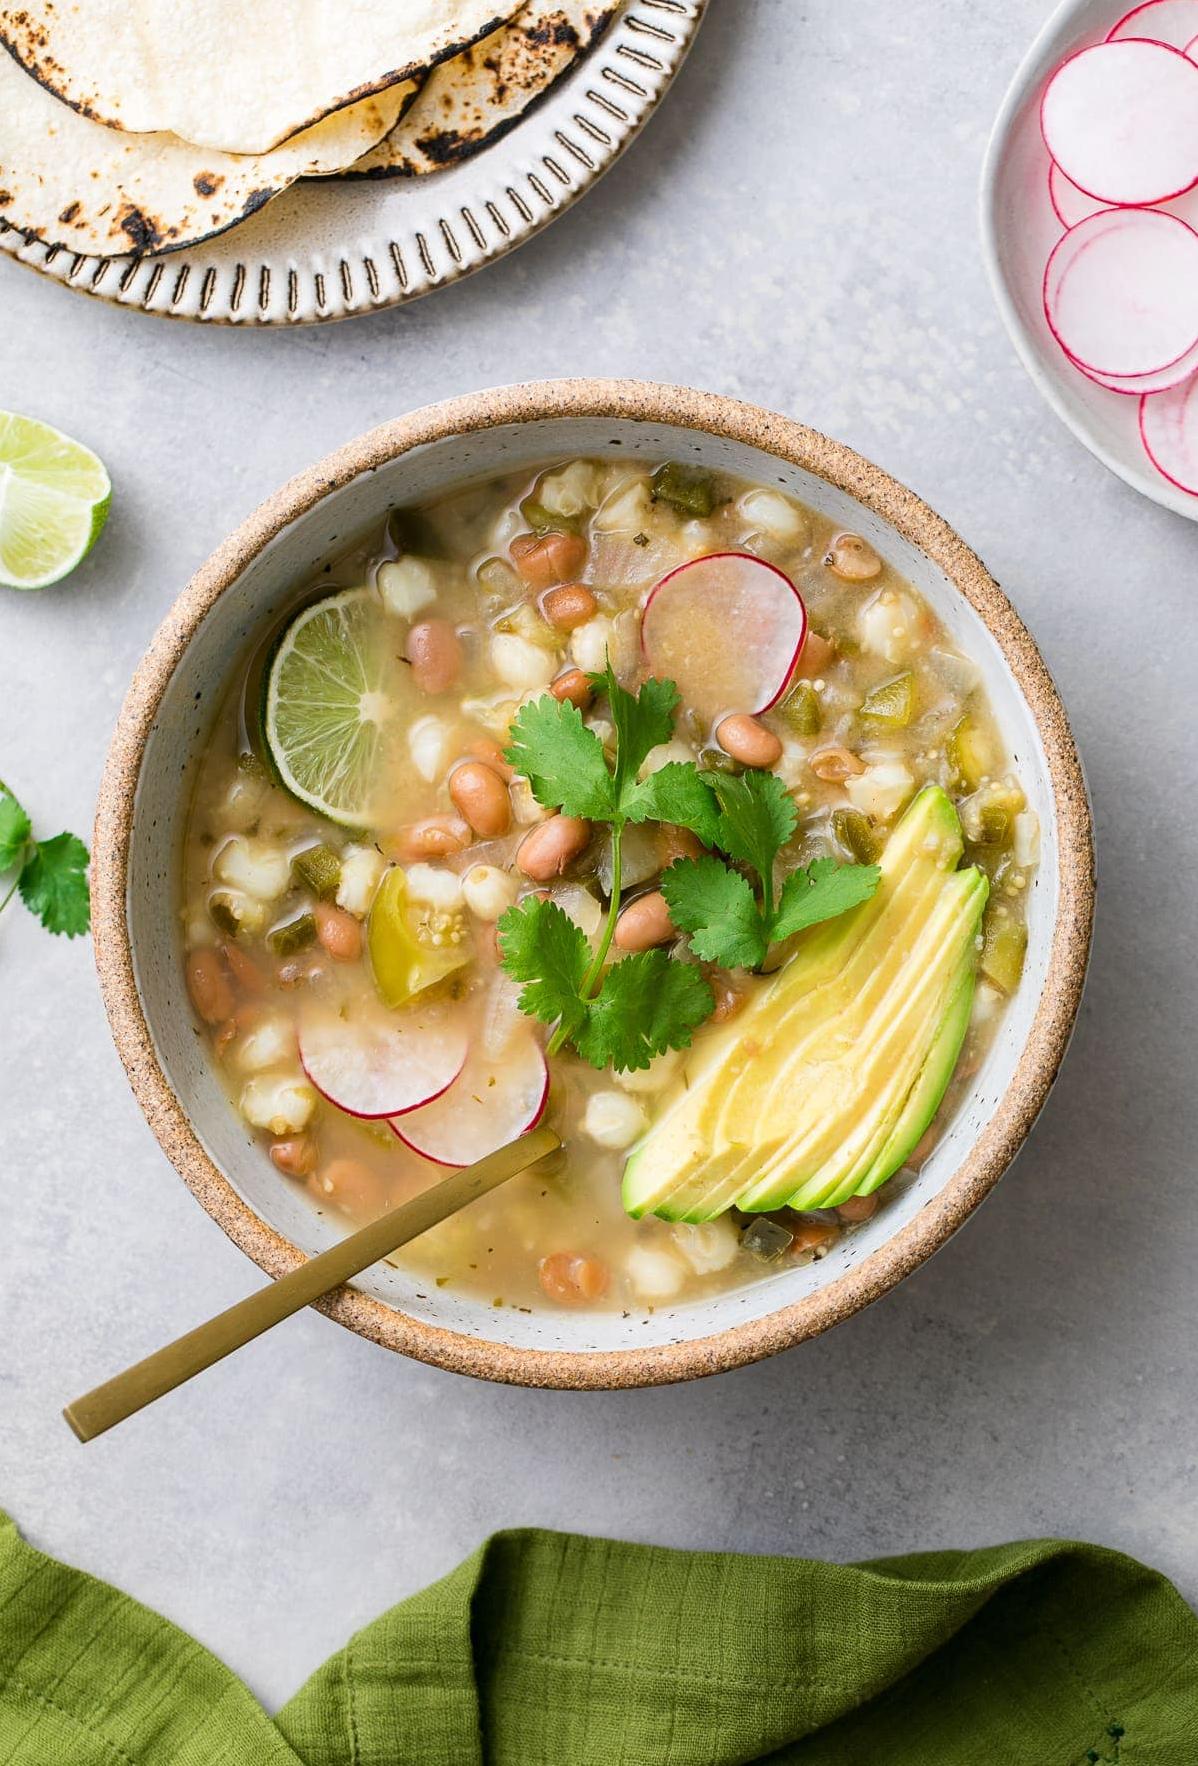  Get ready to spice up your life with this delicious Mexican soup!